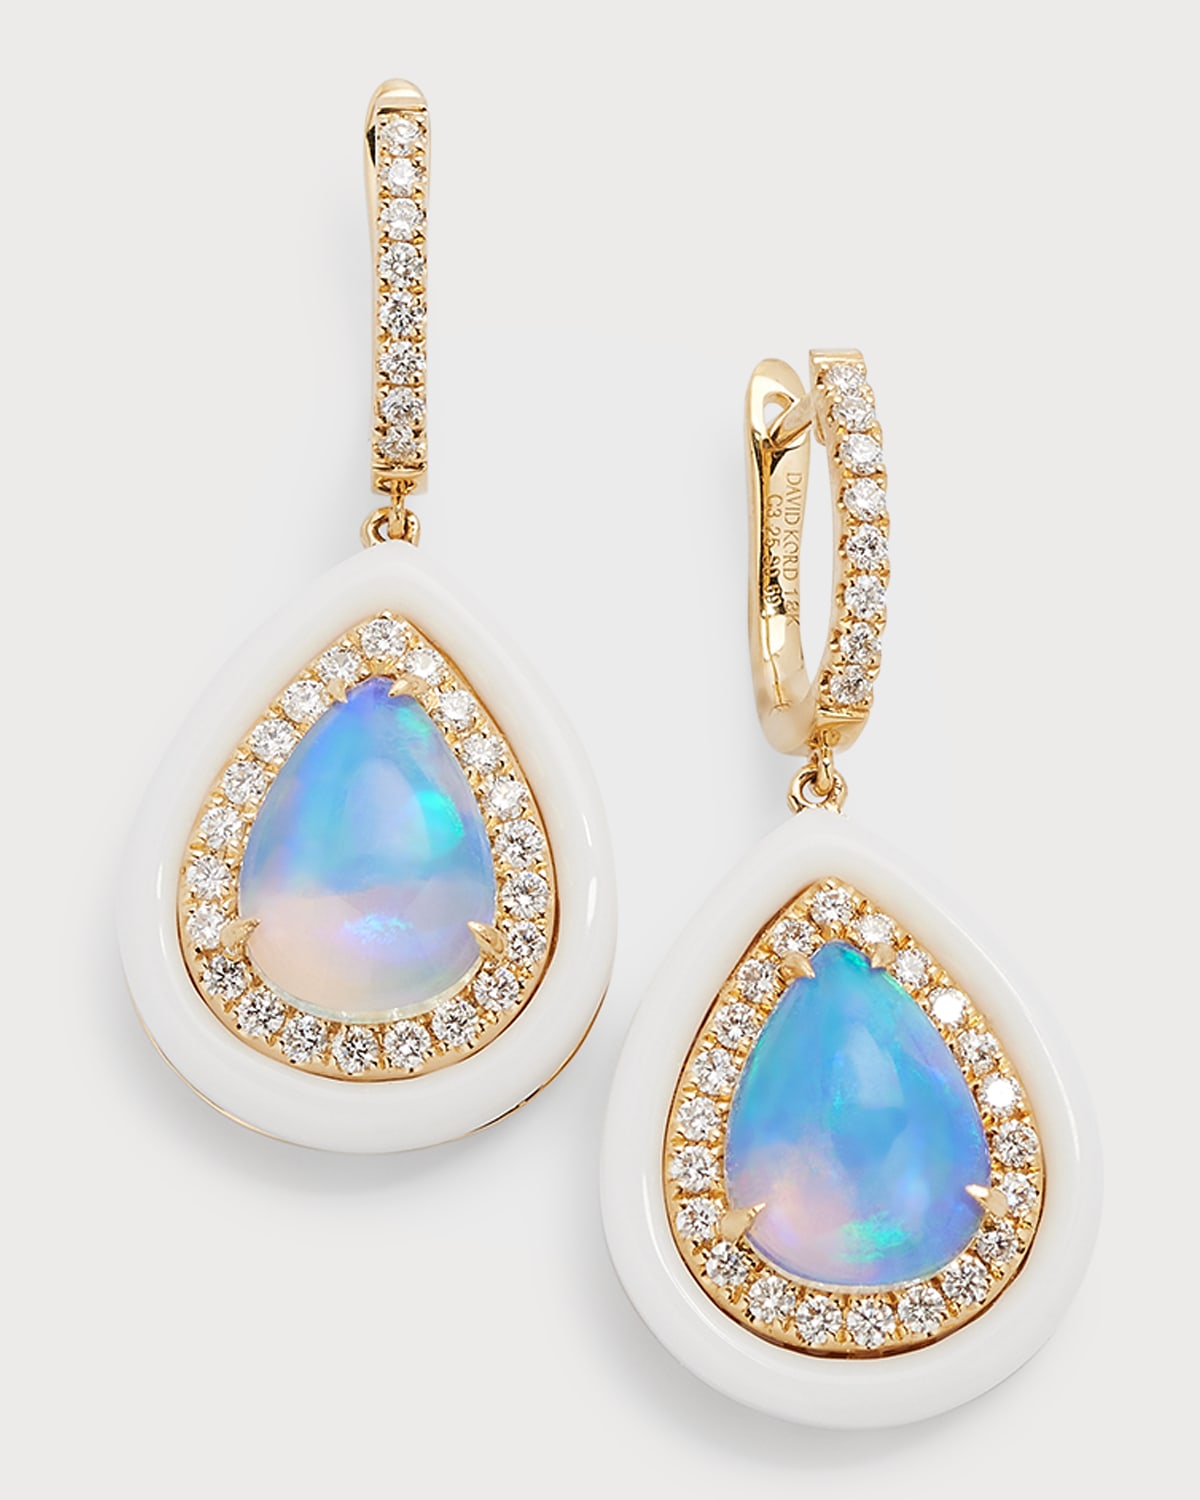 18K Yellow Gold Earrings with Pear-Shape Opal, Diamonds and White Frame, 3.07tcw